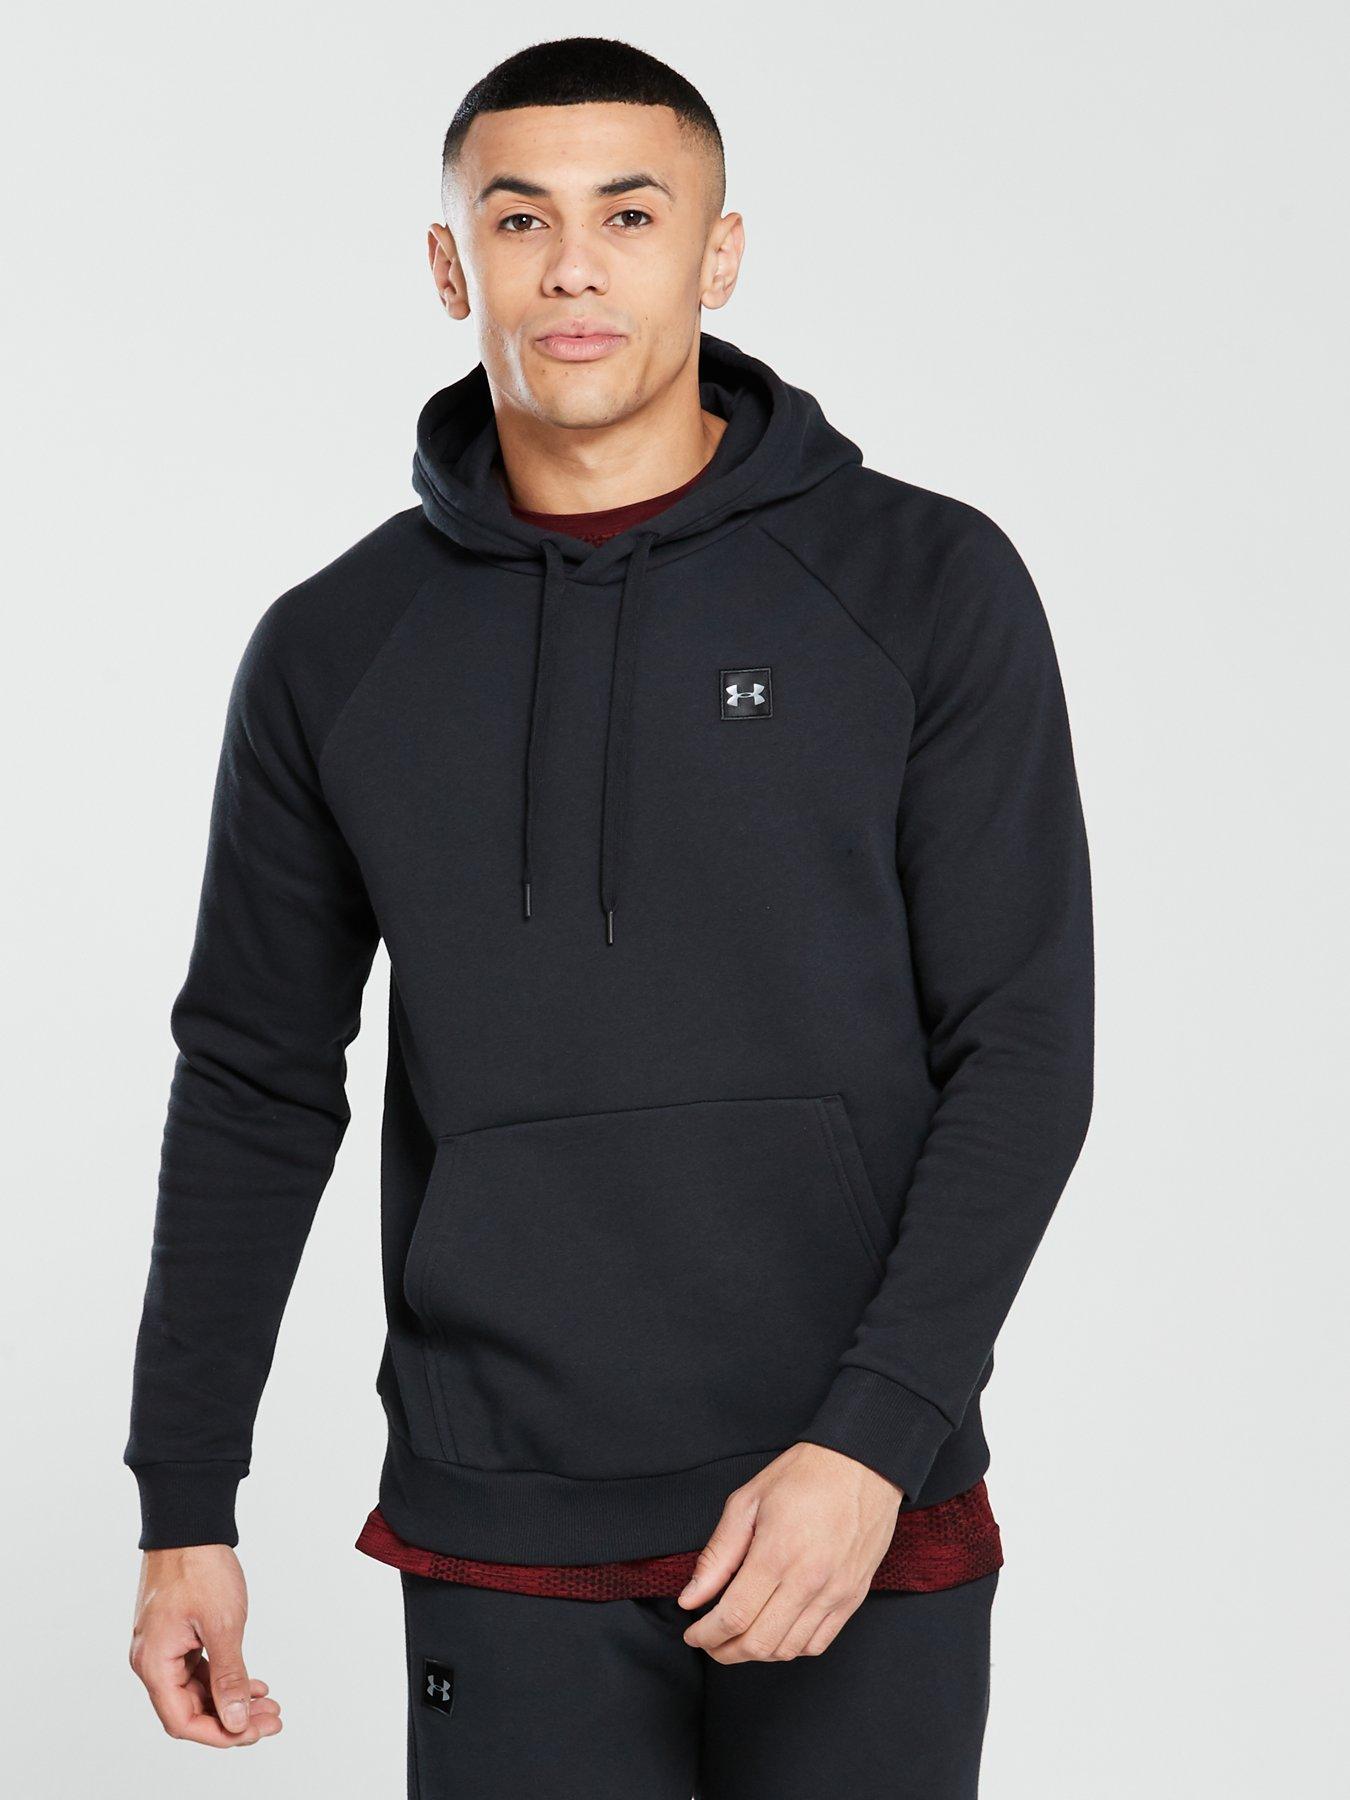 under armour rival logo hoodie